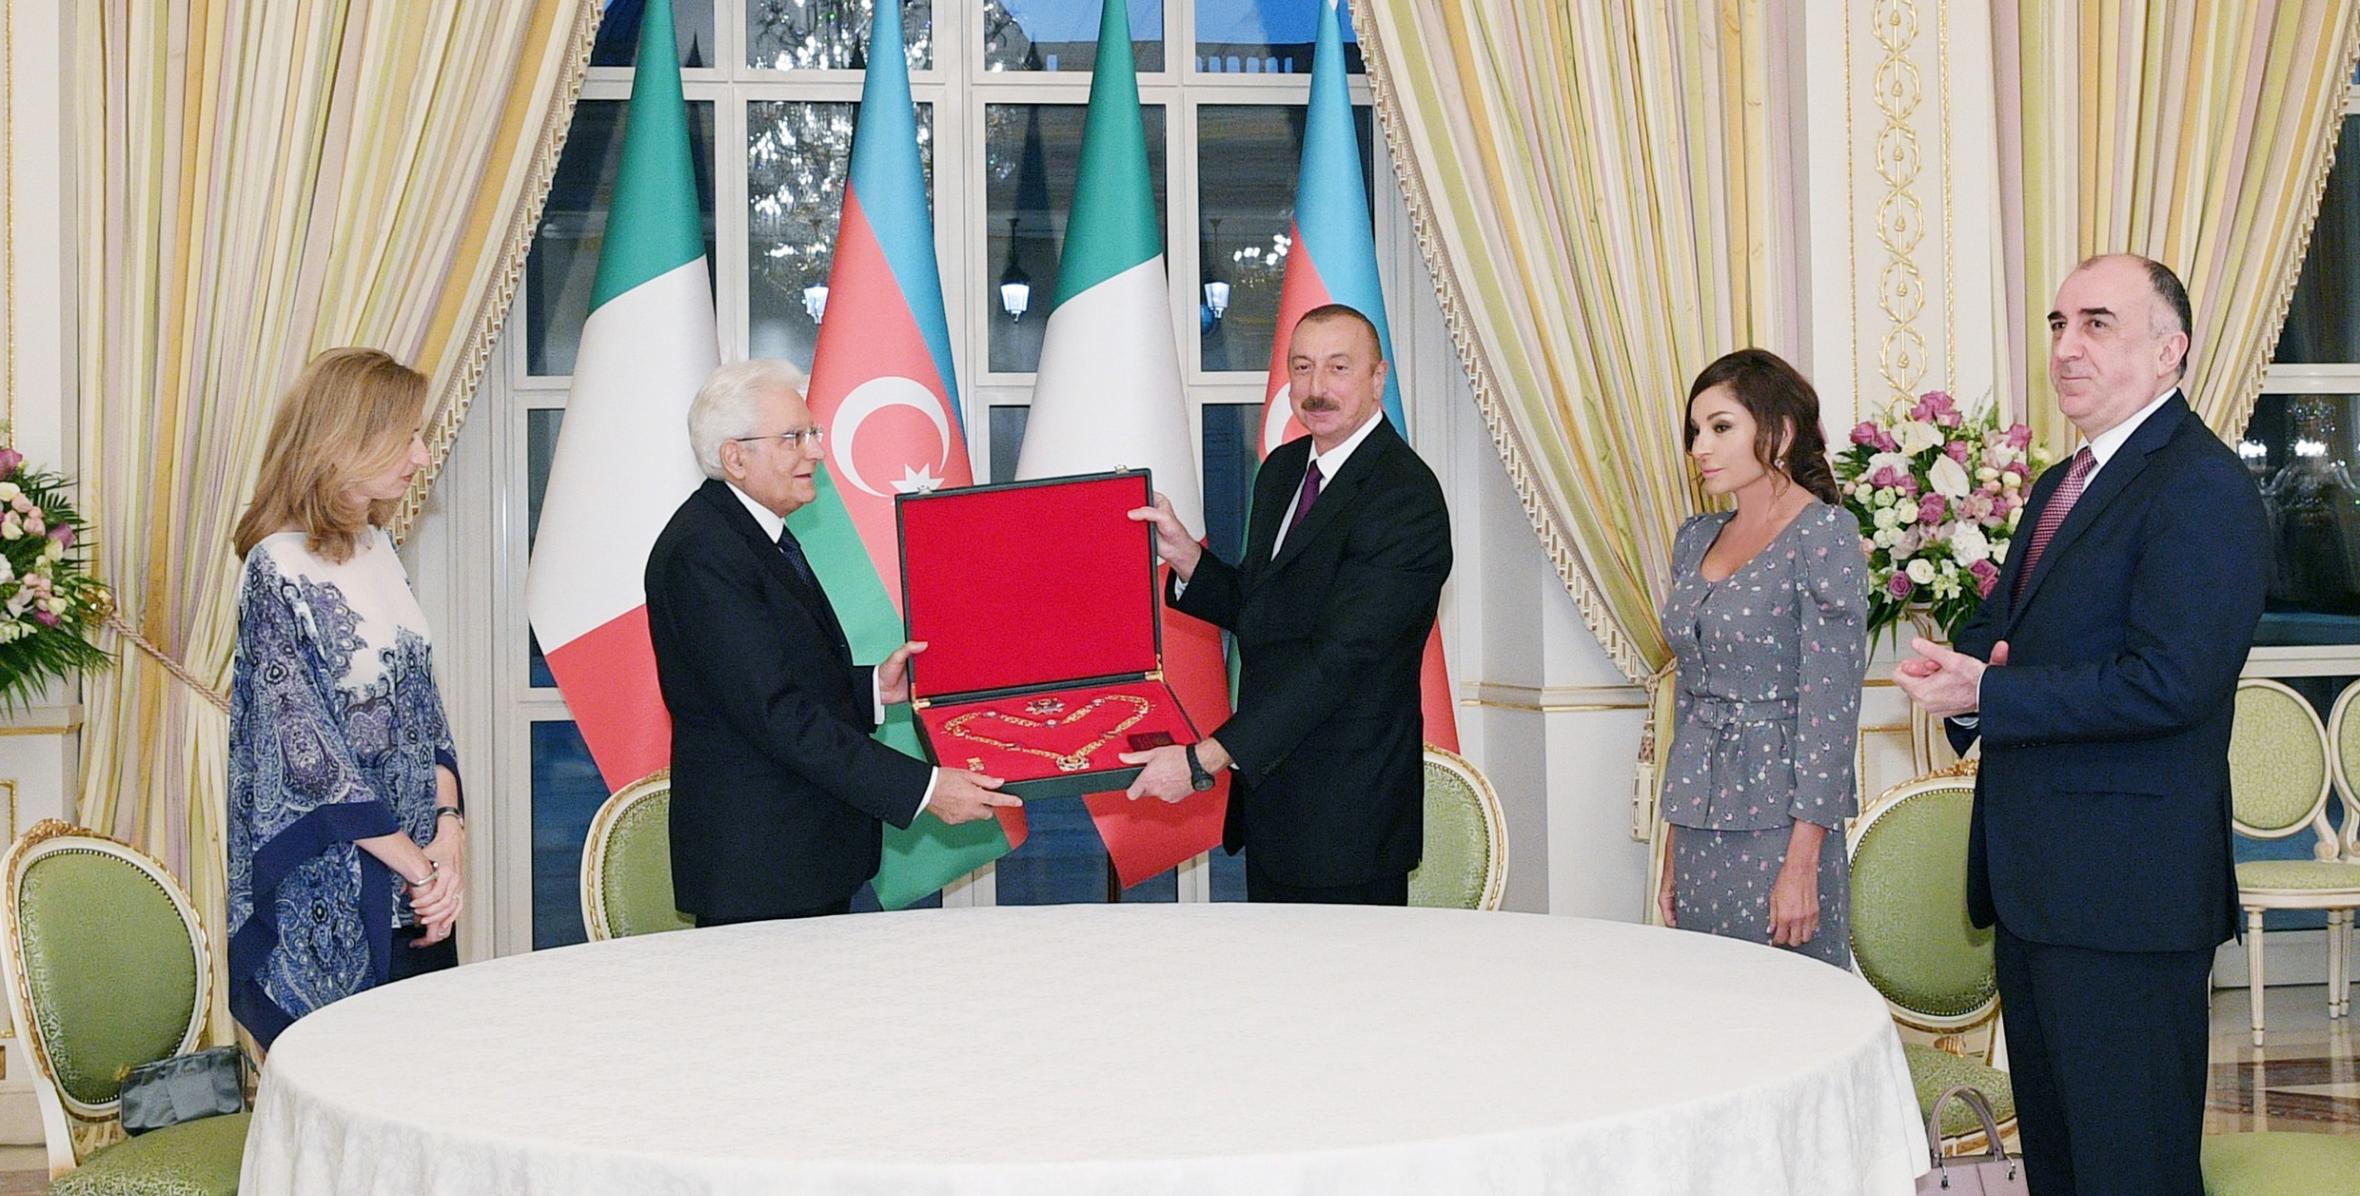 Award ceremony was held as part of Italian President’s official visit to Azerbaijan